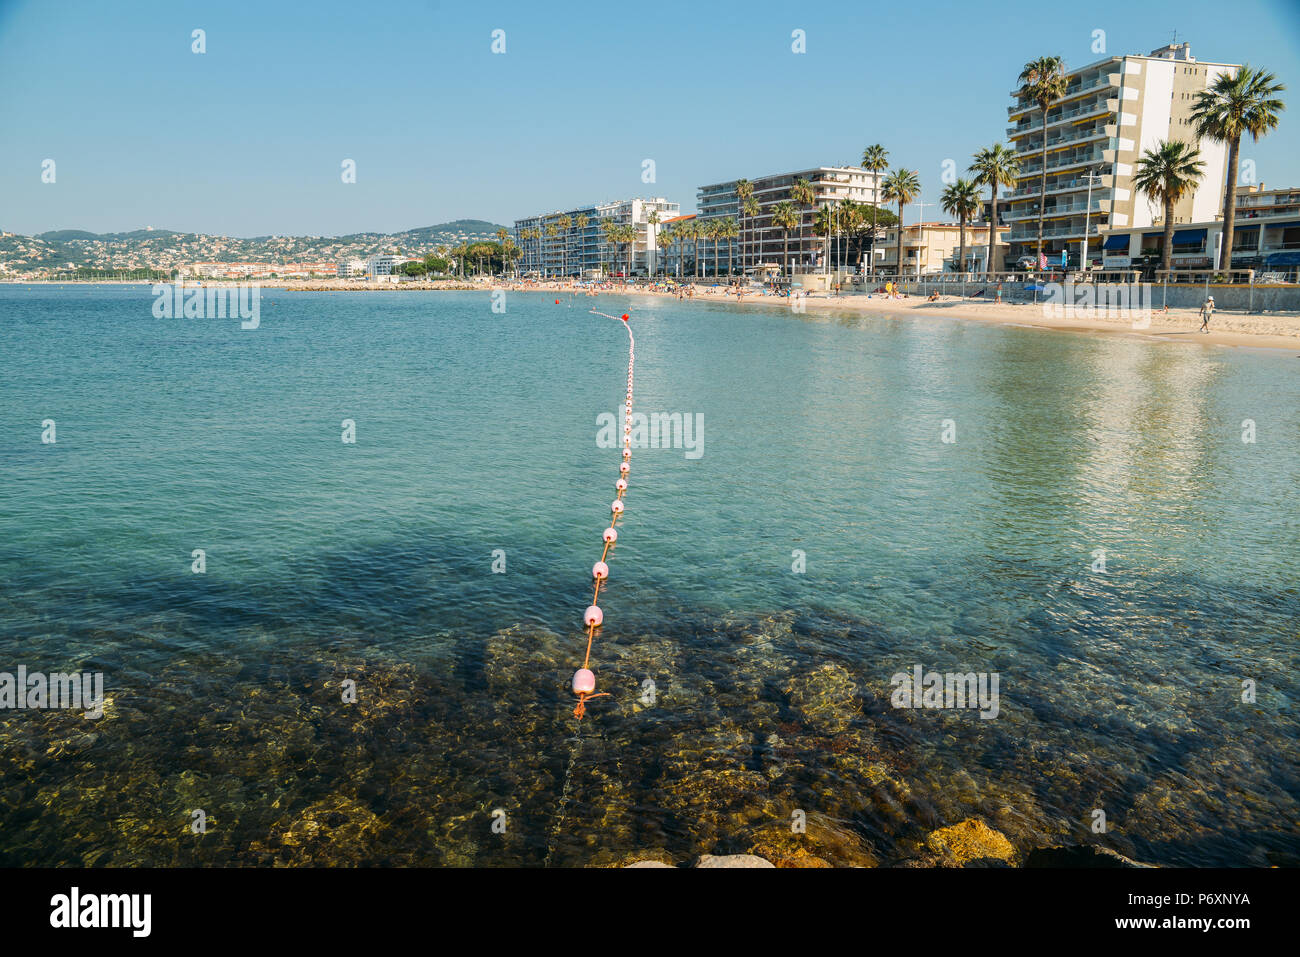 Early morning sun bathers and swimmers at the Juan les Pins beach, a popular resort destination on the Mediterranean Stock Photo